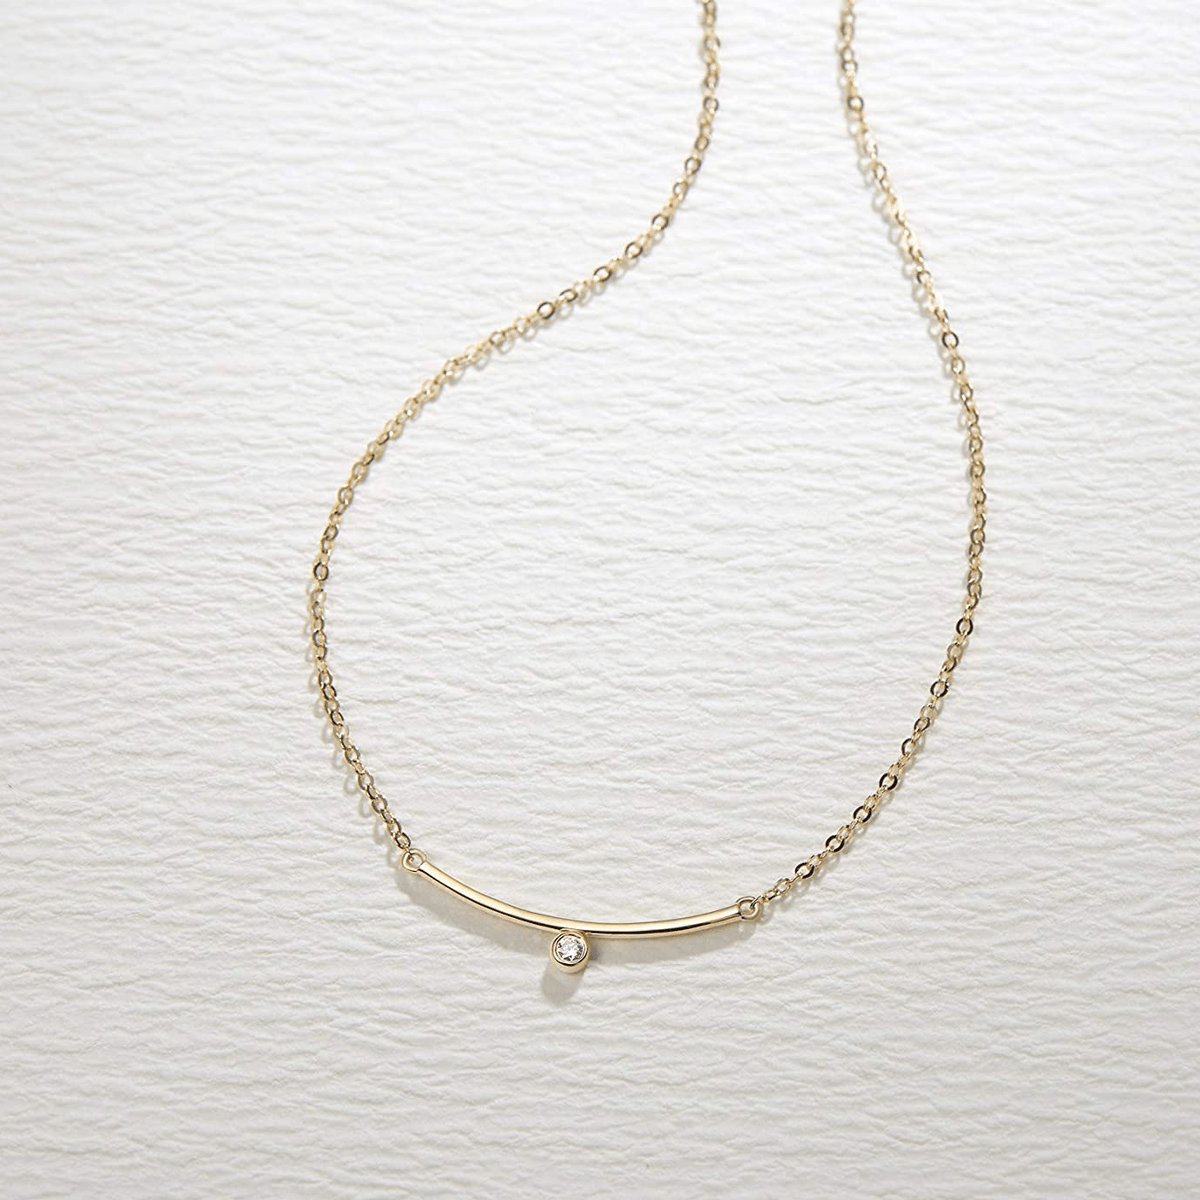 Fanci "Diamond Under Silver Lining" 14K Solid Yellow Gold Necklace Full